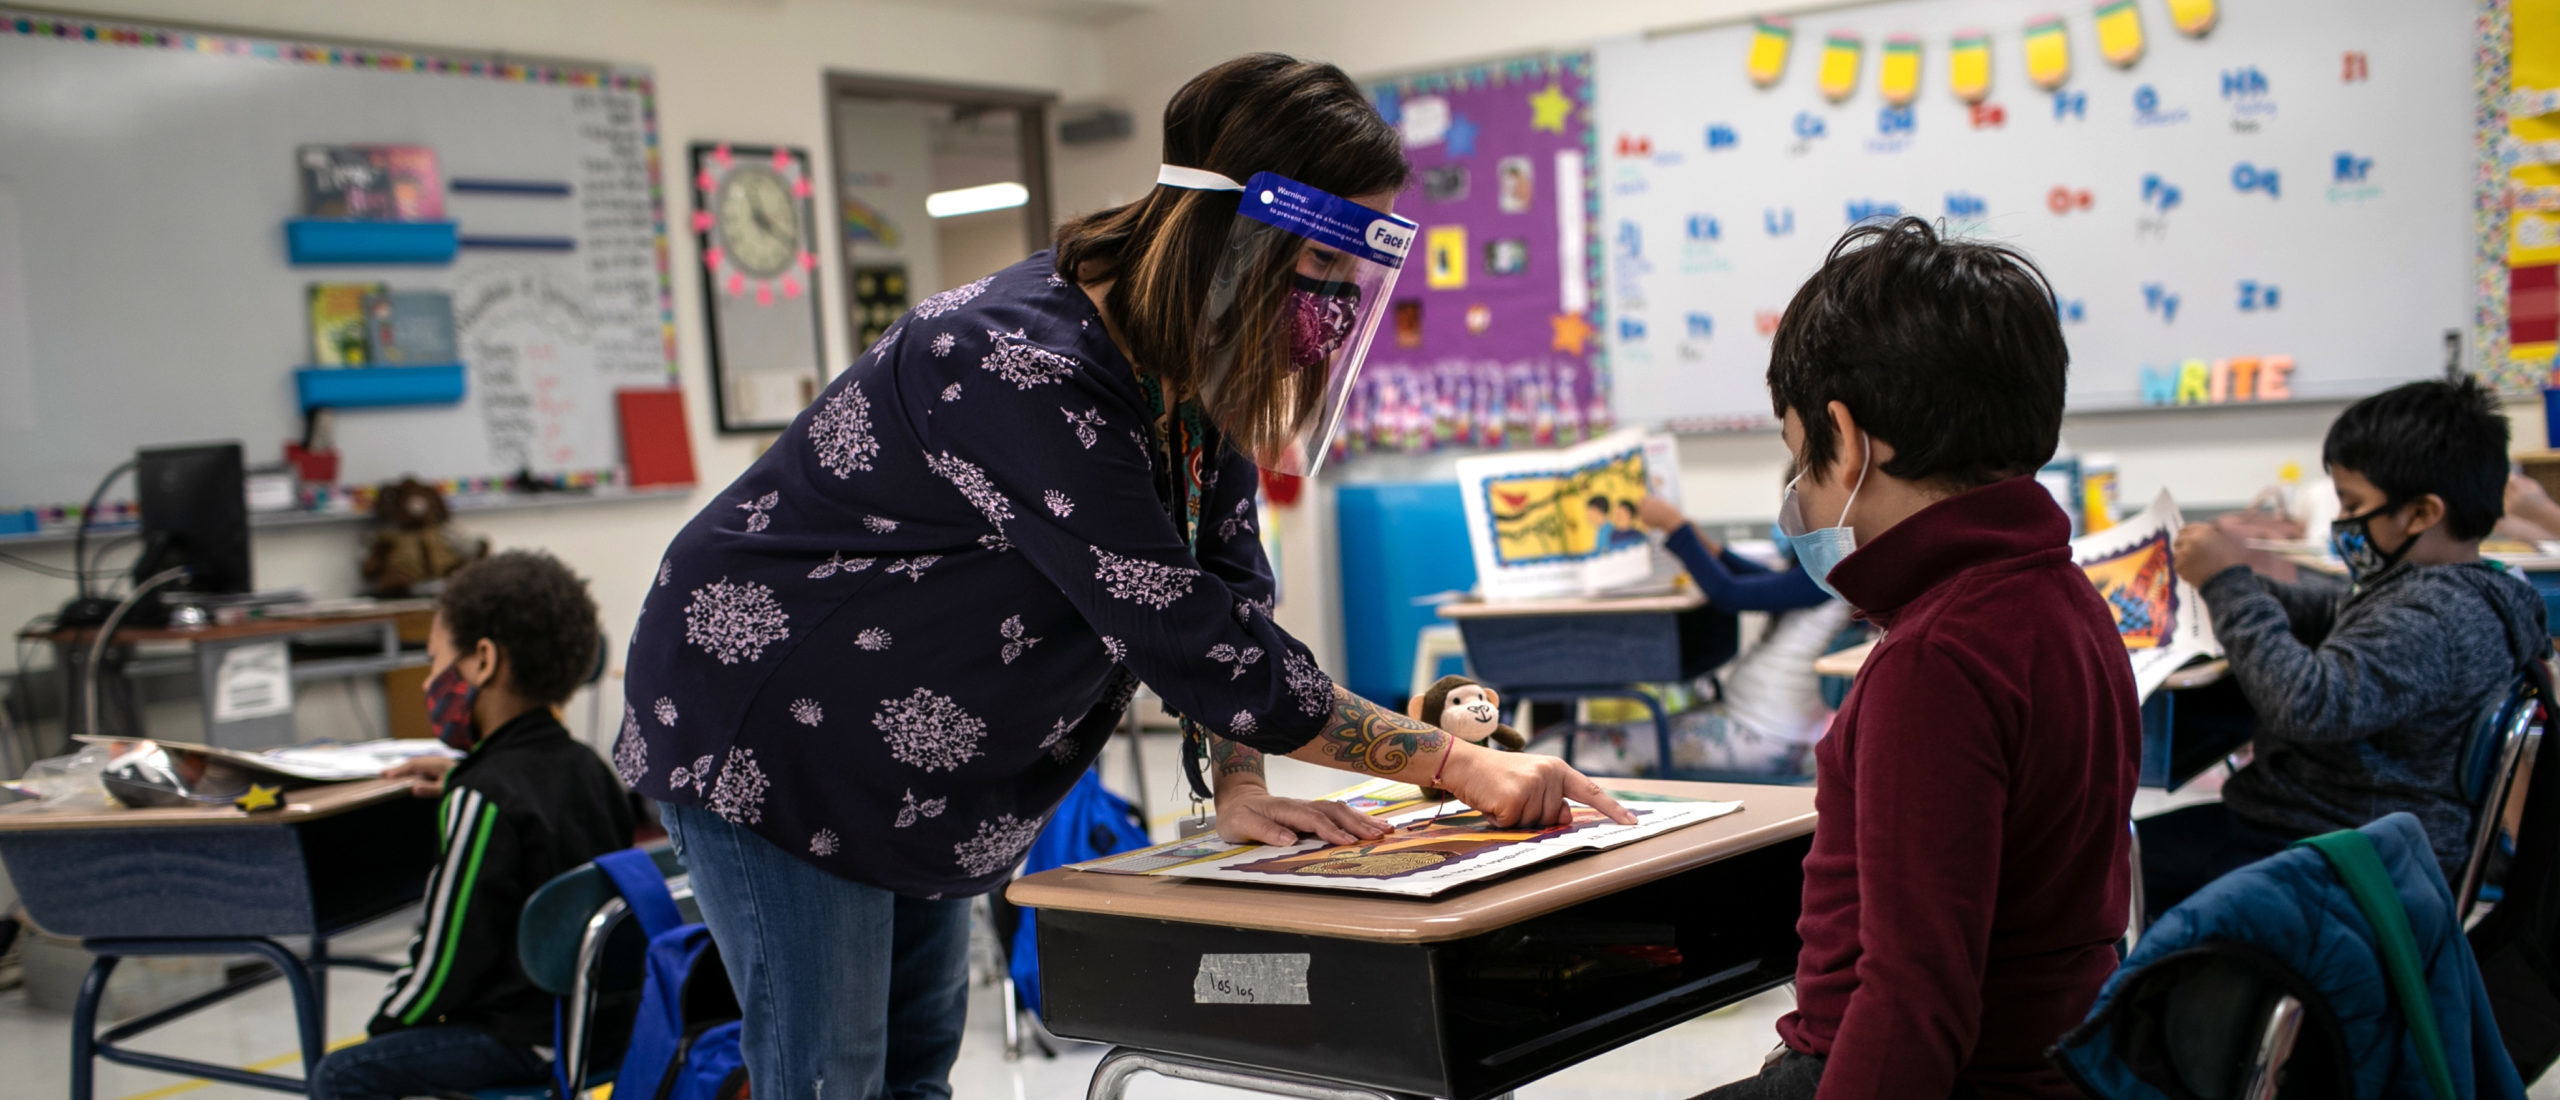 Teacher Elizabeth DeSantis, wearing a mask and face shield, helps a first grader during reading class at Stark Elementary School on September 16, 2020 in Stamford, Connecticut. (Photo by John Moore/Getty Images)